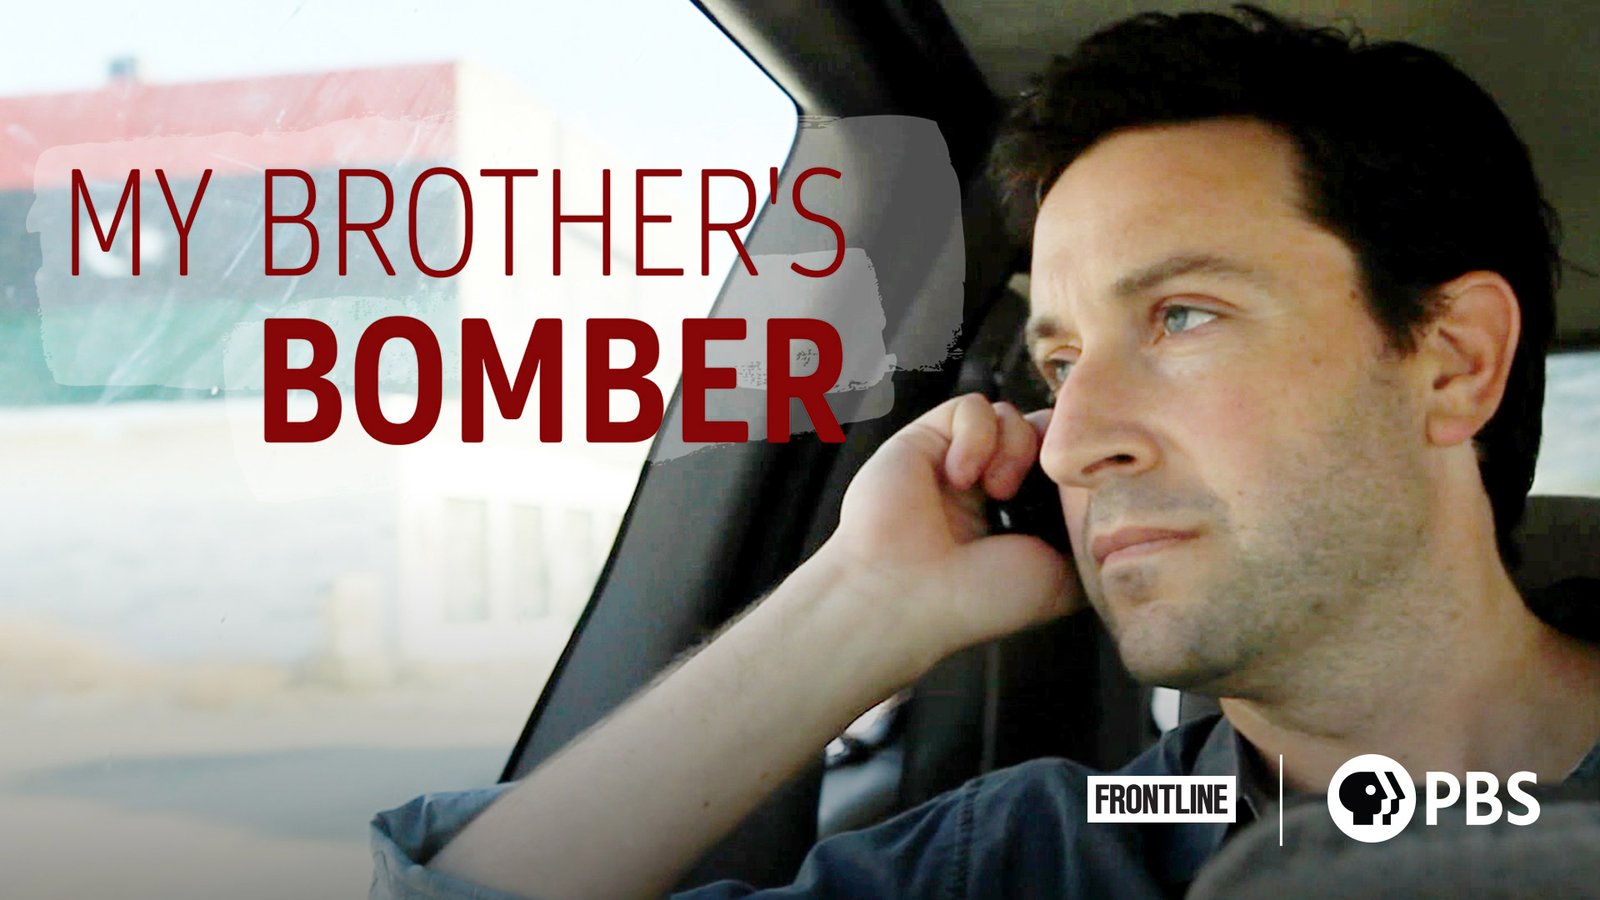 Frontline: My Brother's Bomber